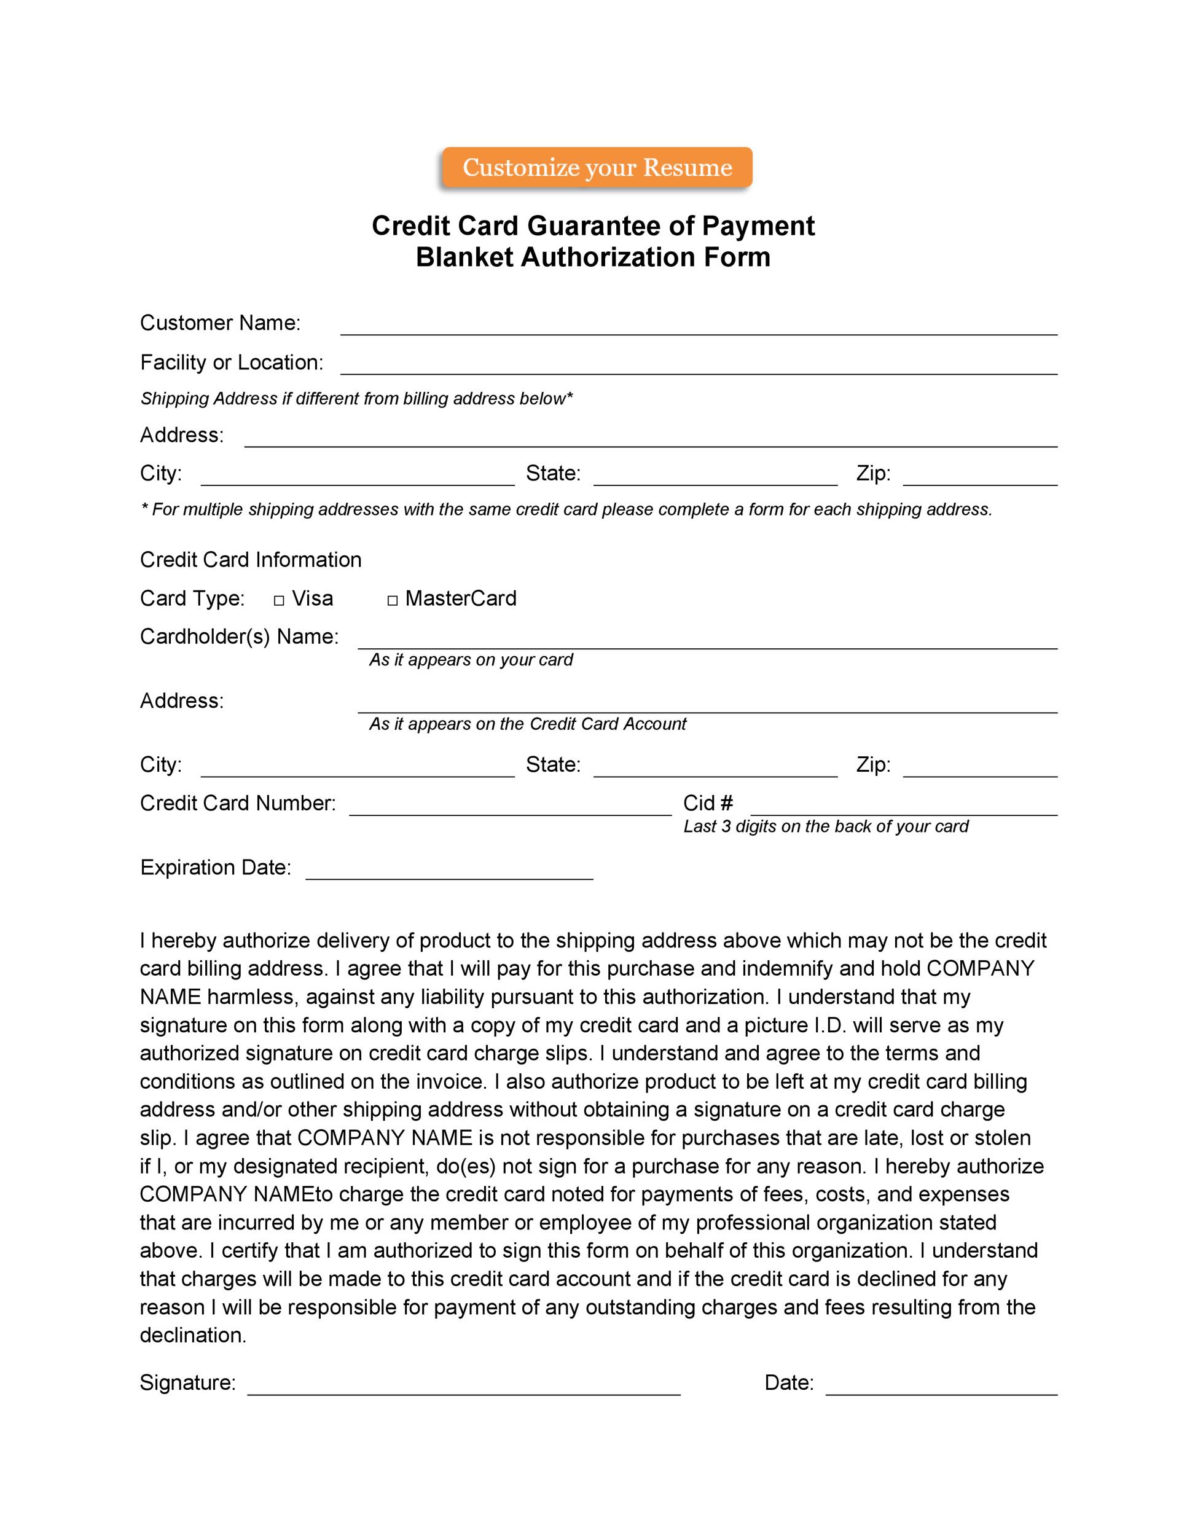 41 Credit Card Authorization Forms Templates Ready To Use Regarding Credit Card Payment Form 5715